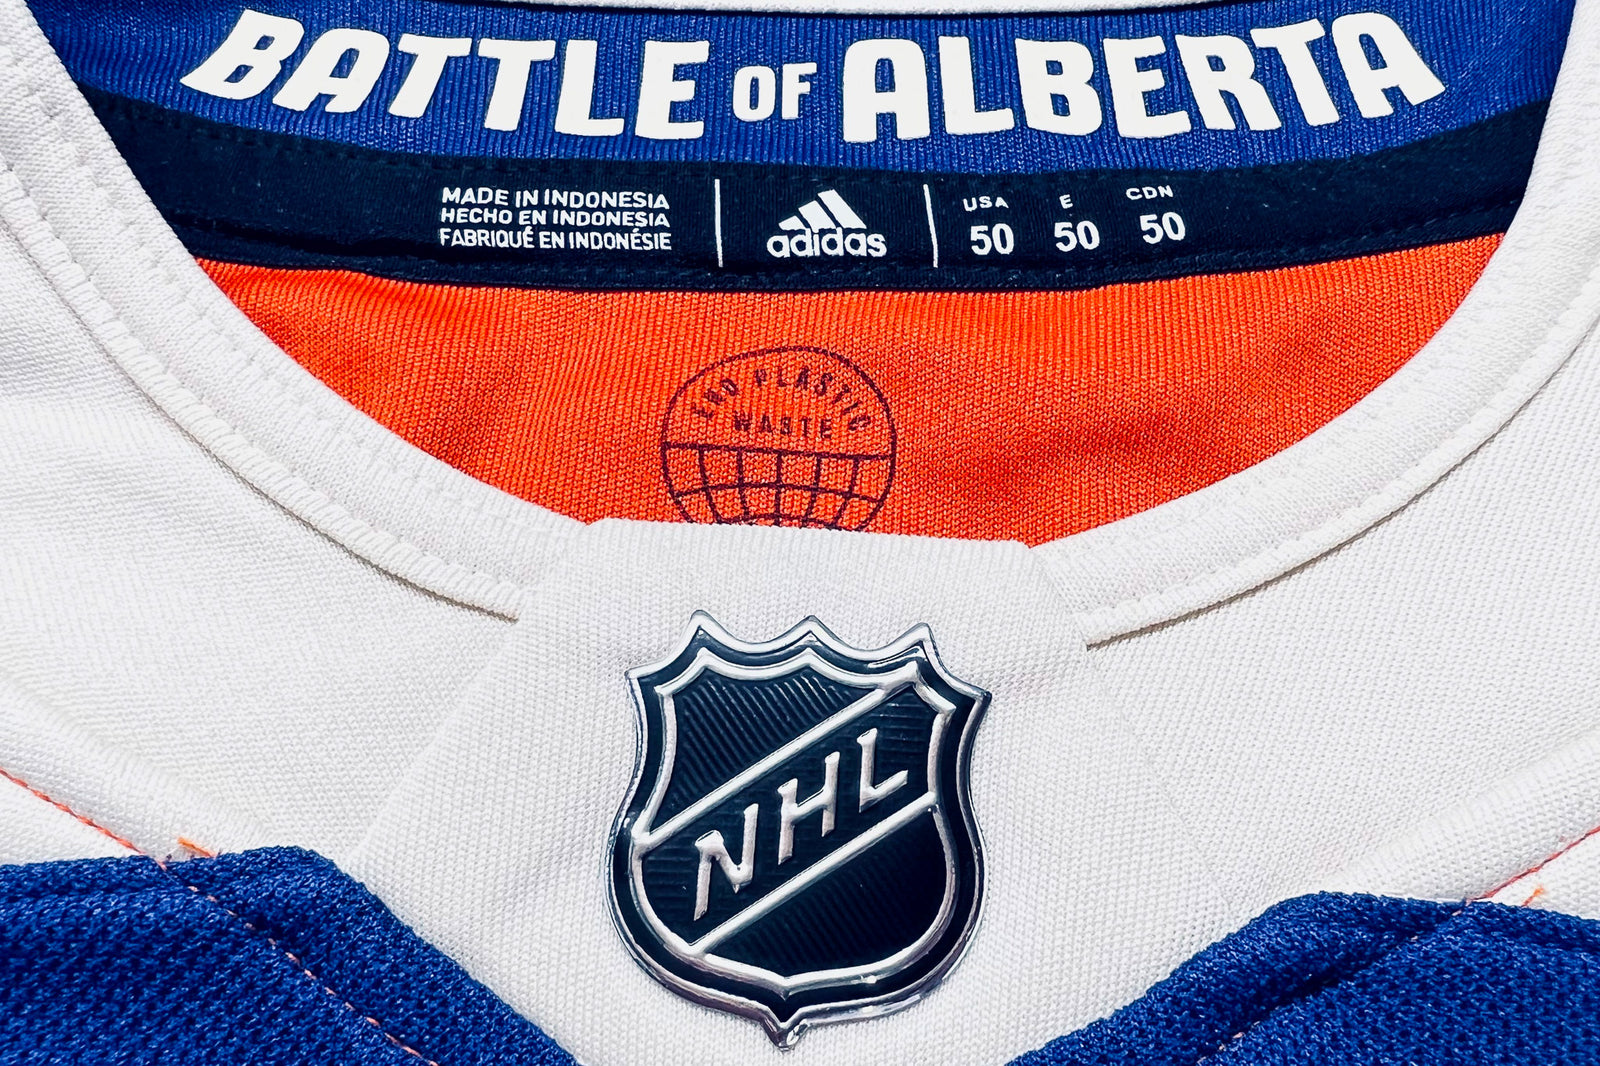 NHL Youth Edmonton Oilers Outerstuff Heritage Classic Premier Jersey